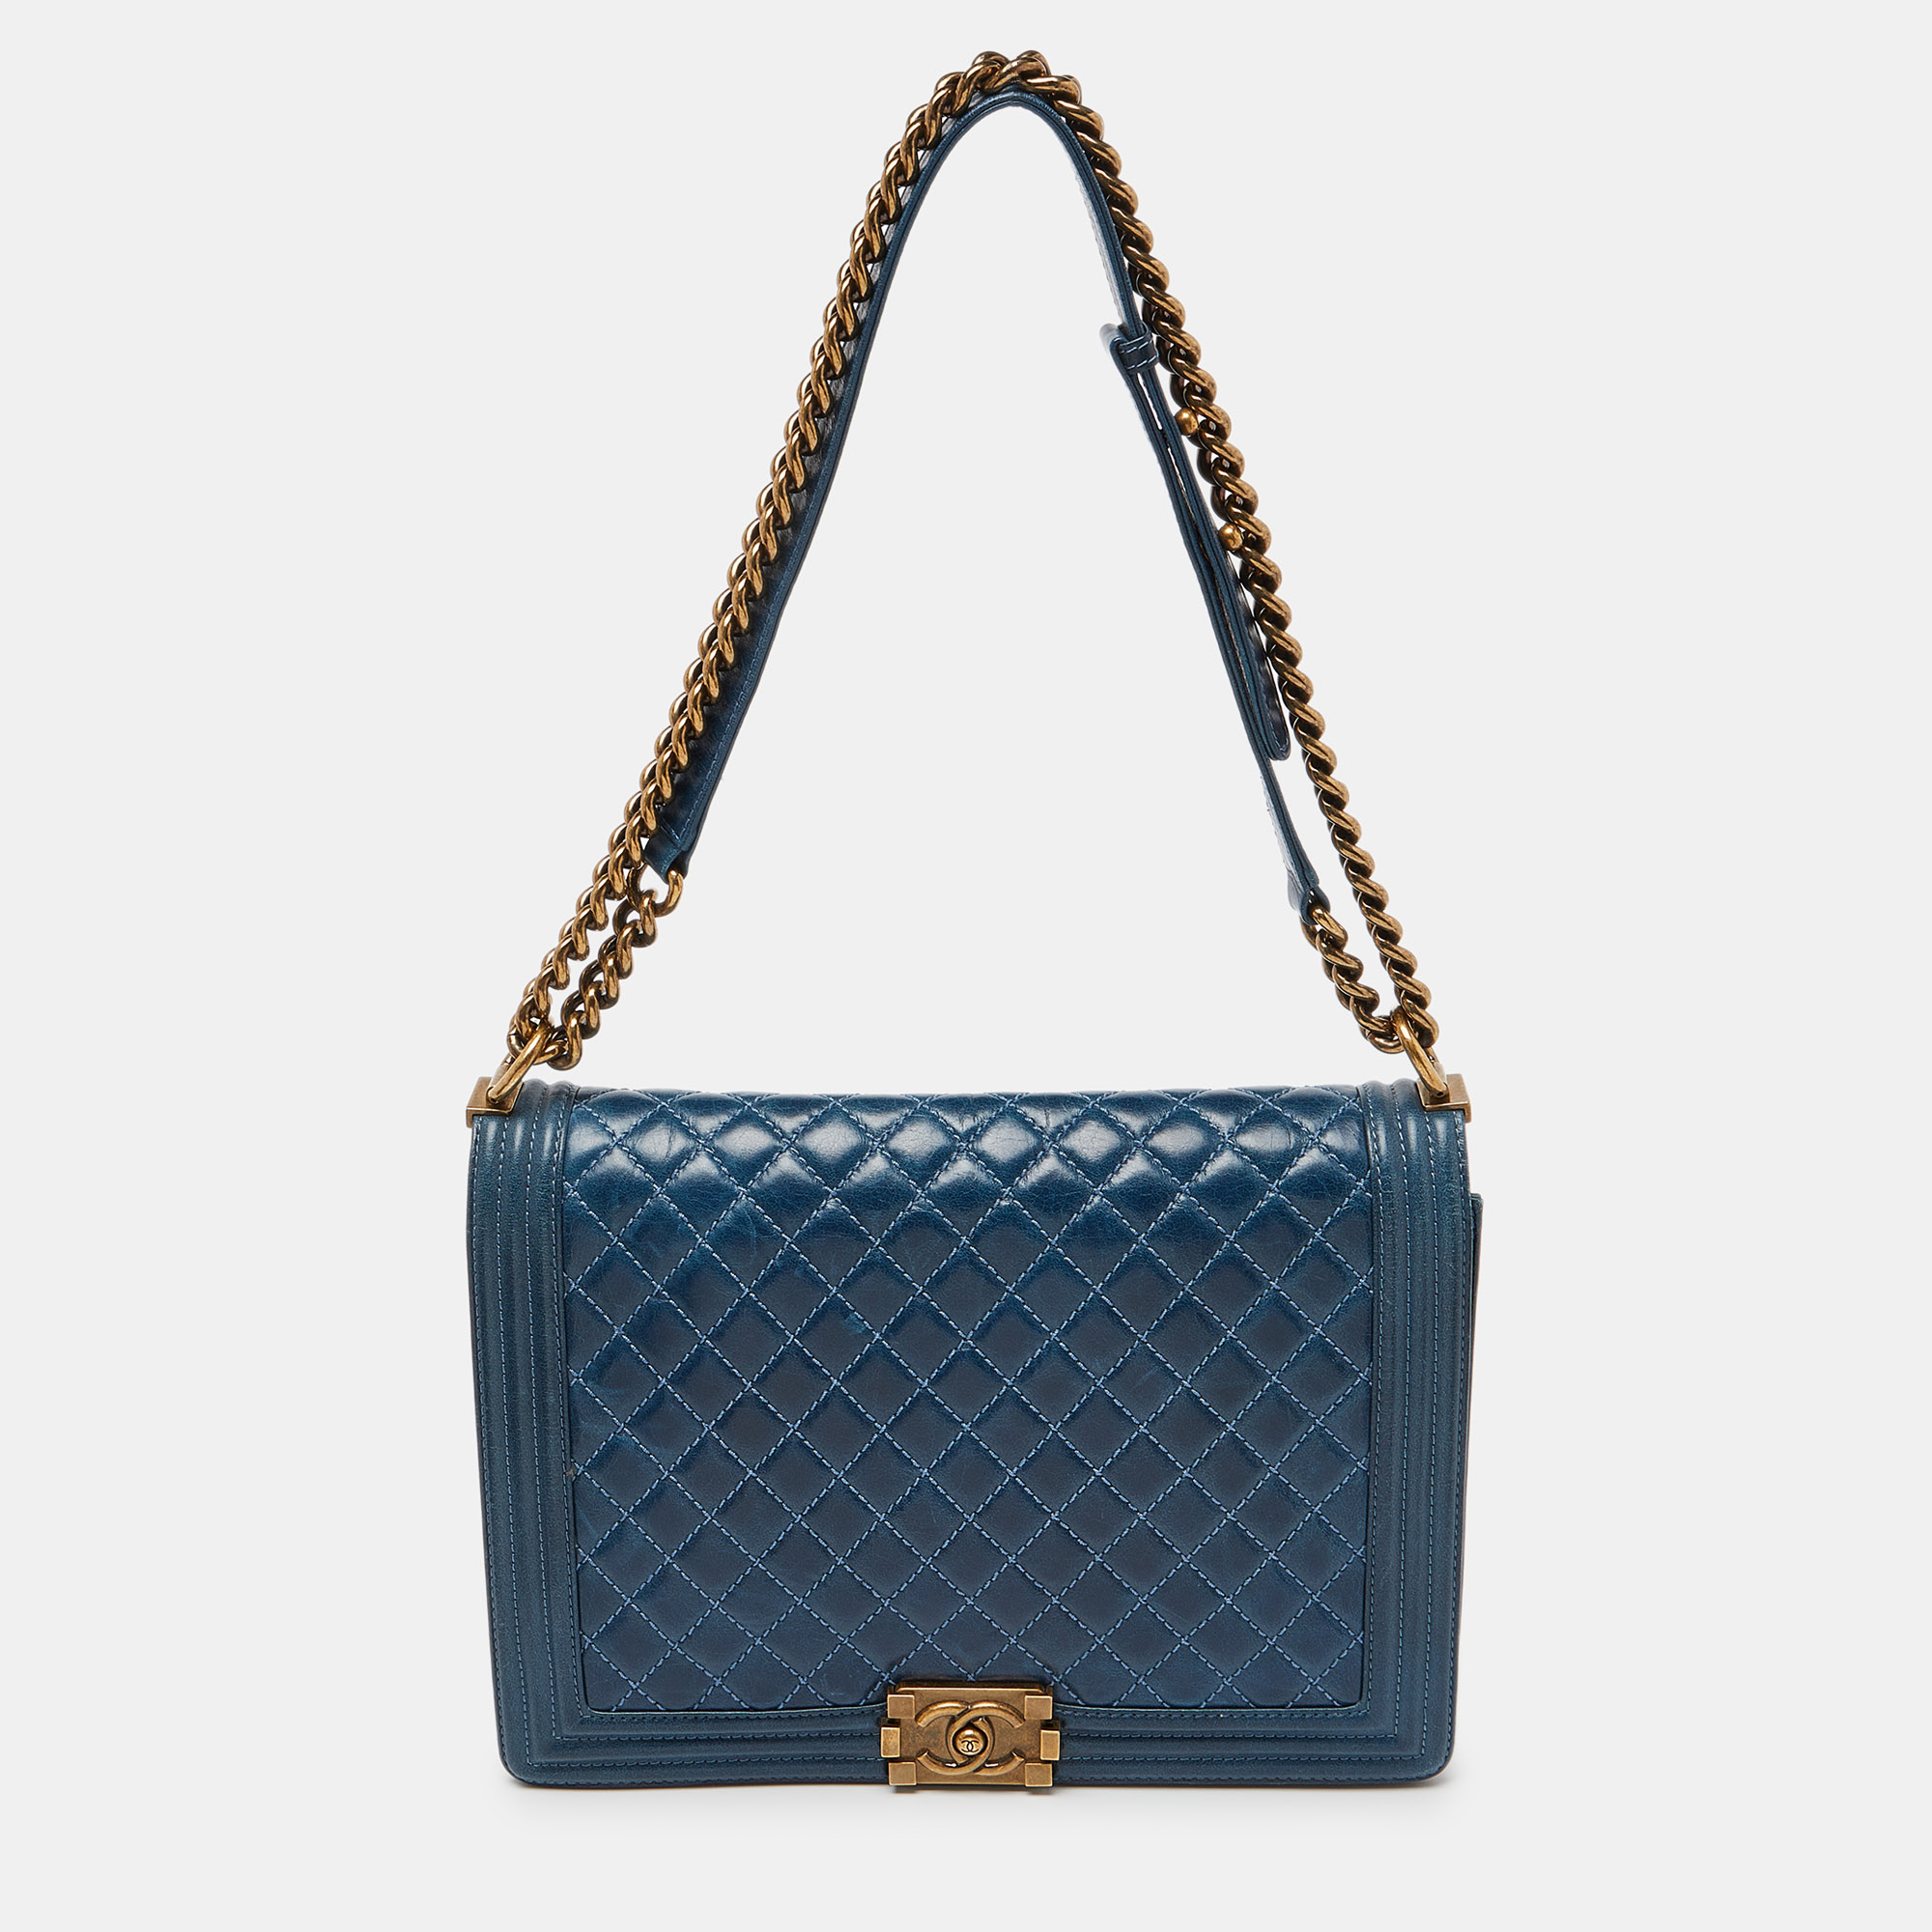 Chanel blue quilted leather large boy flap bag